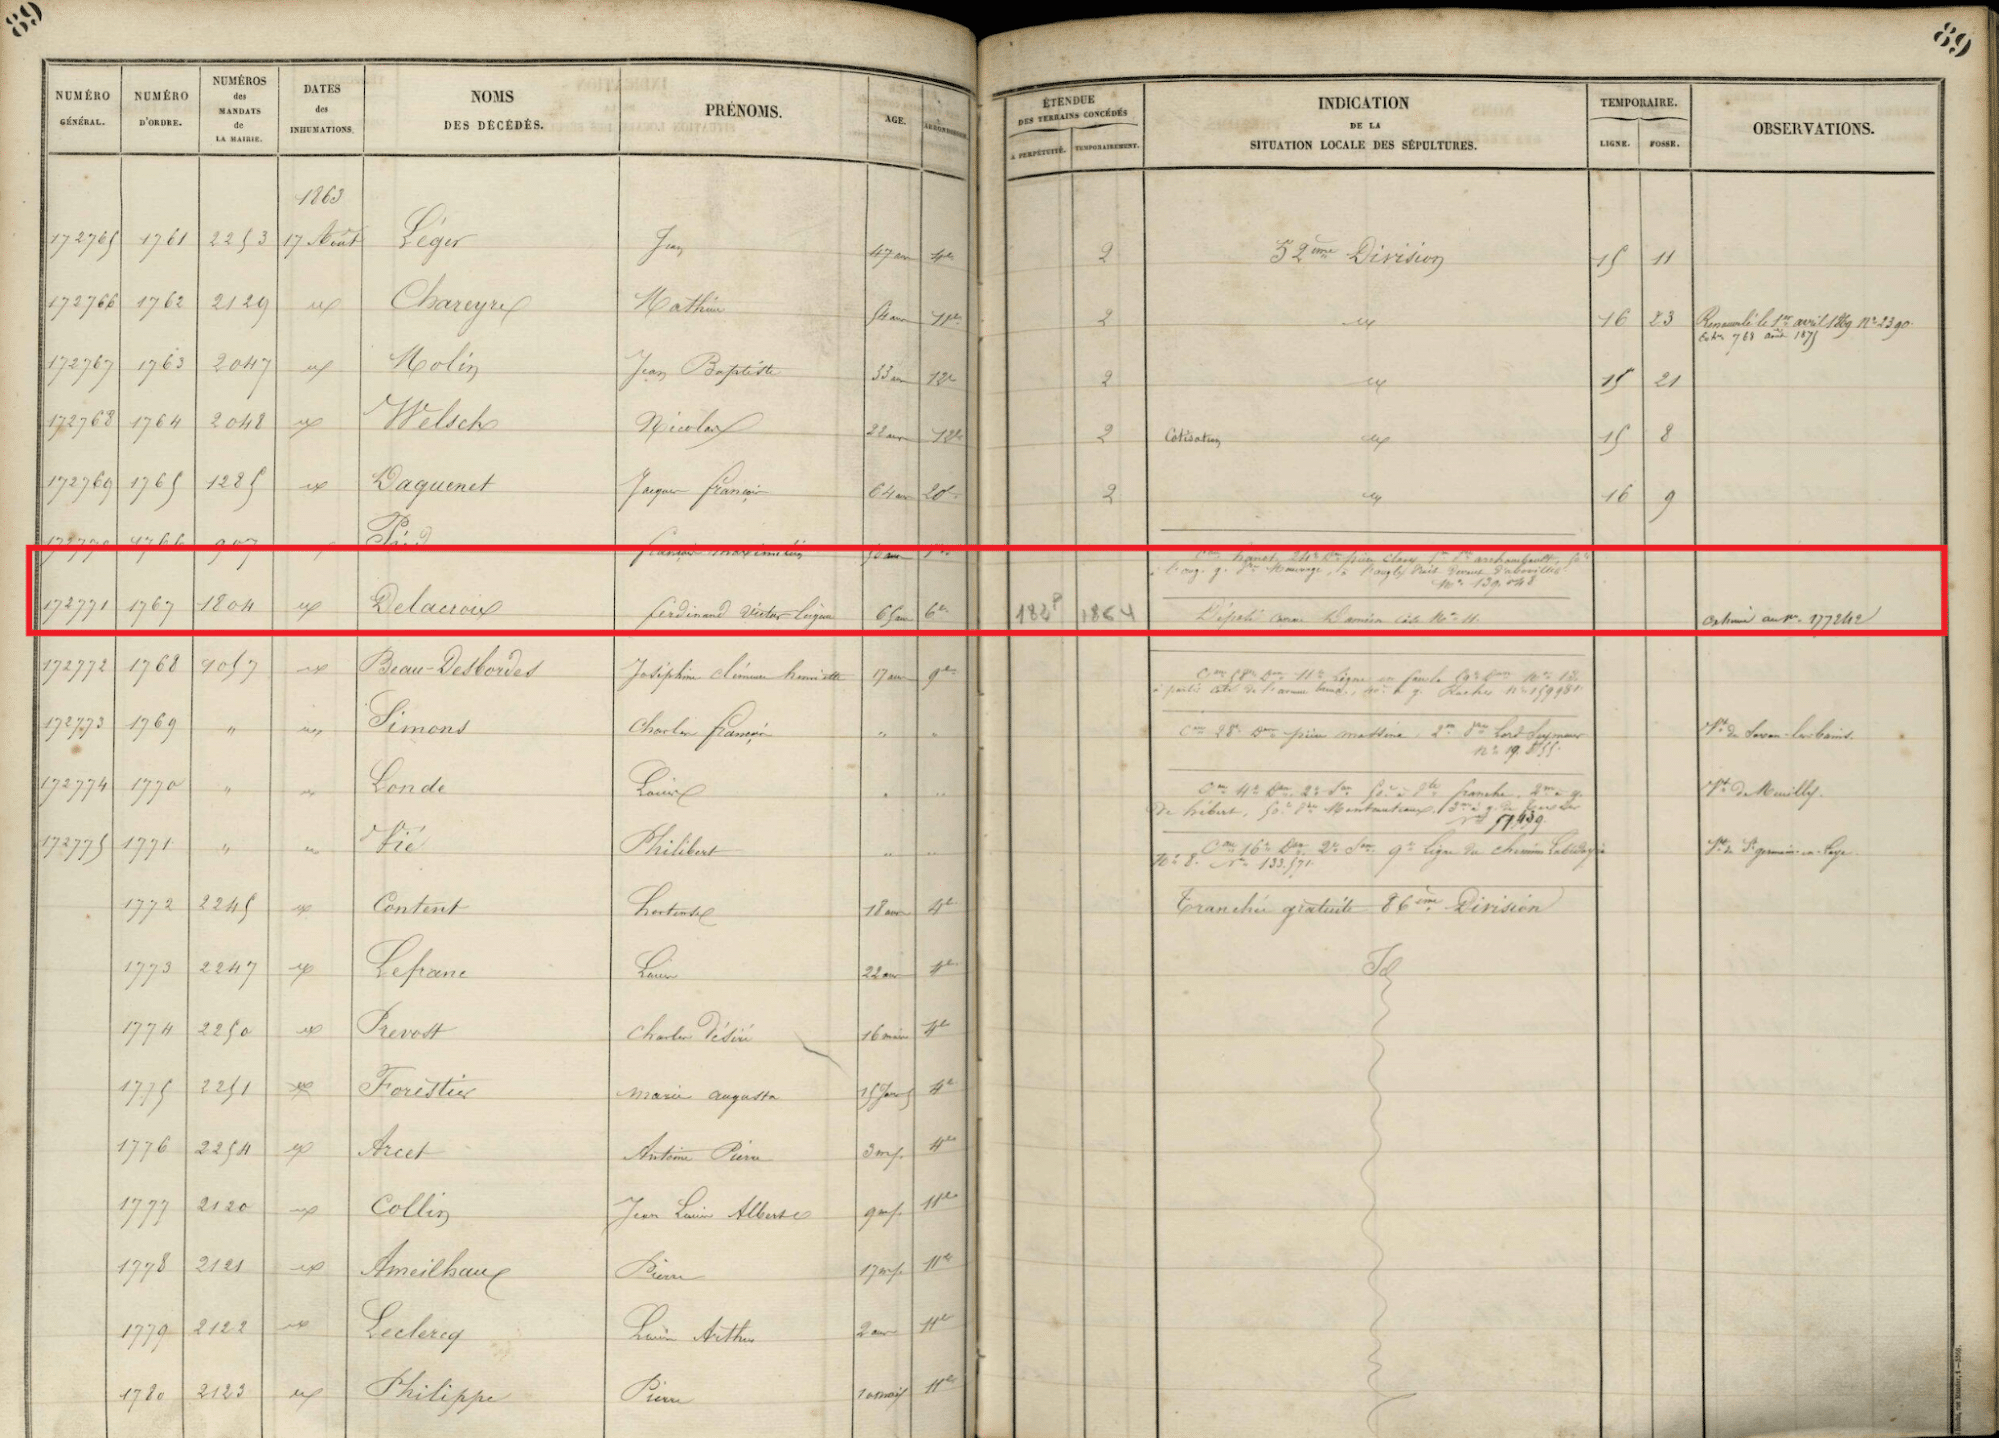 Burial record of Eugène Delacroix [Credit: MyHeritage Daily Burial Registers of Parisian Cemeteries. The original documents may be viewed on the website of Registres journaliers d'inhumation des cimetières parisiens]